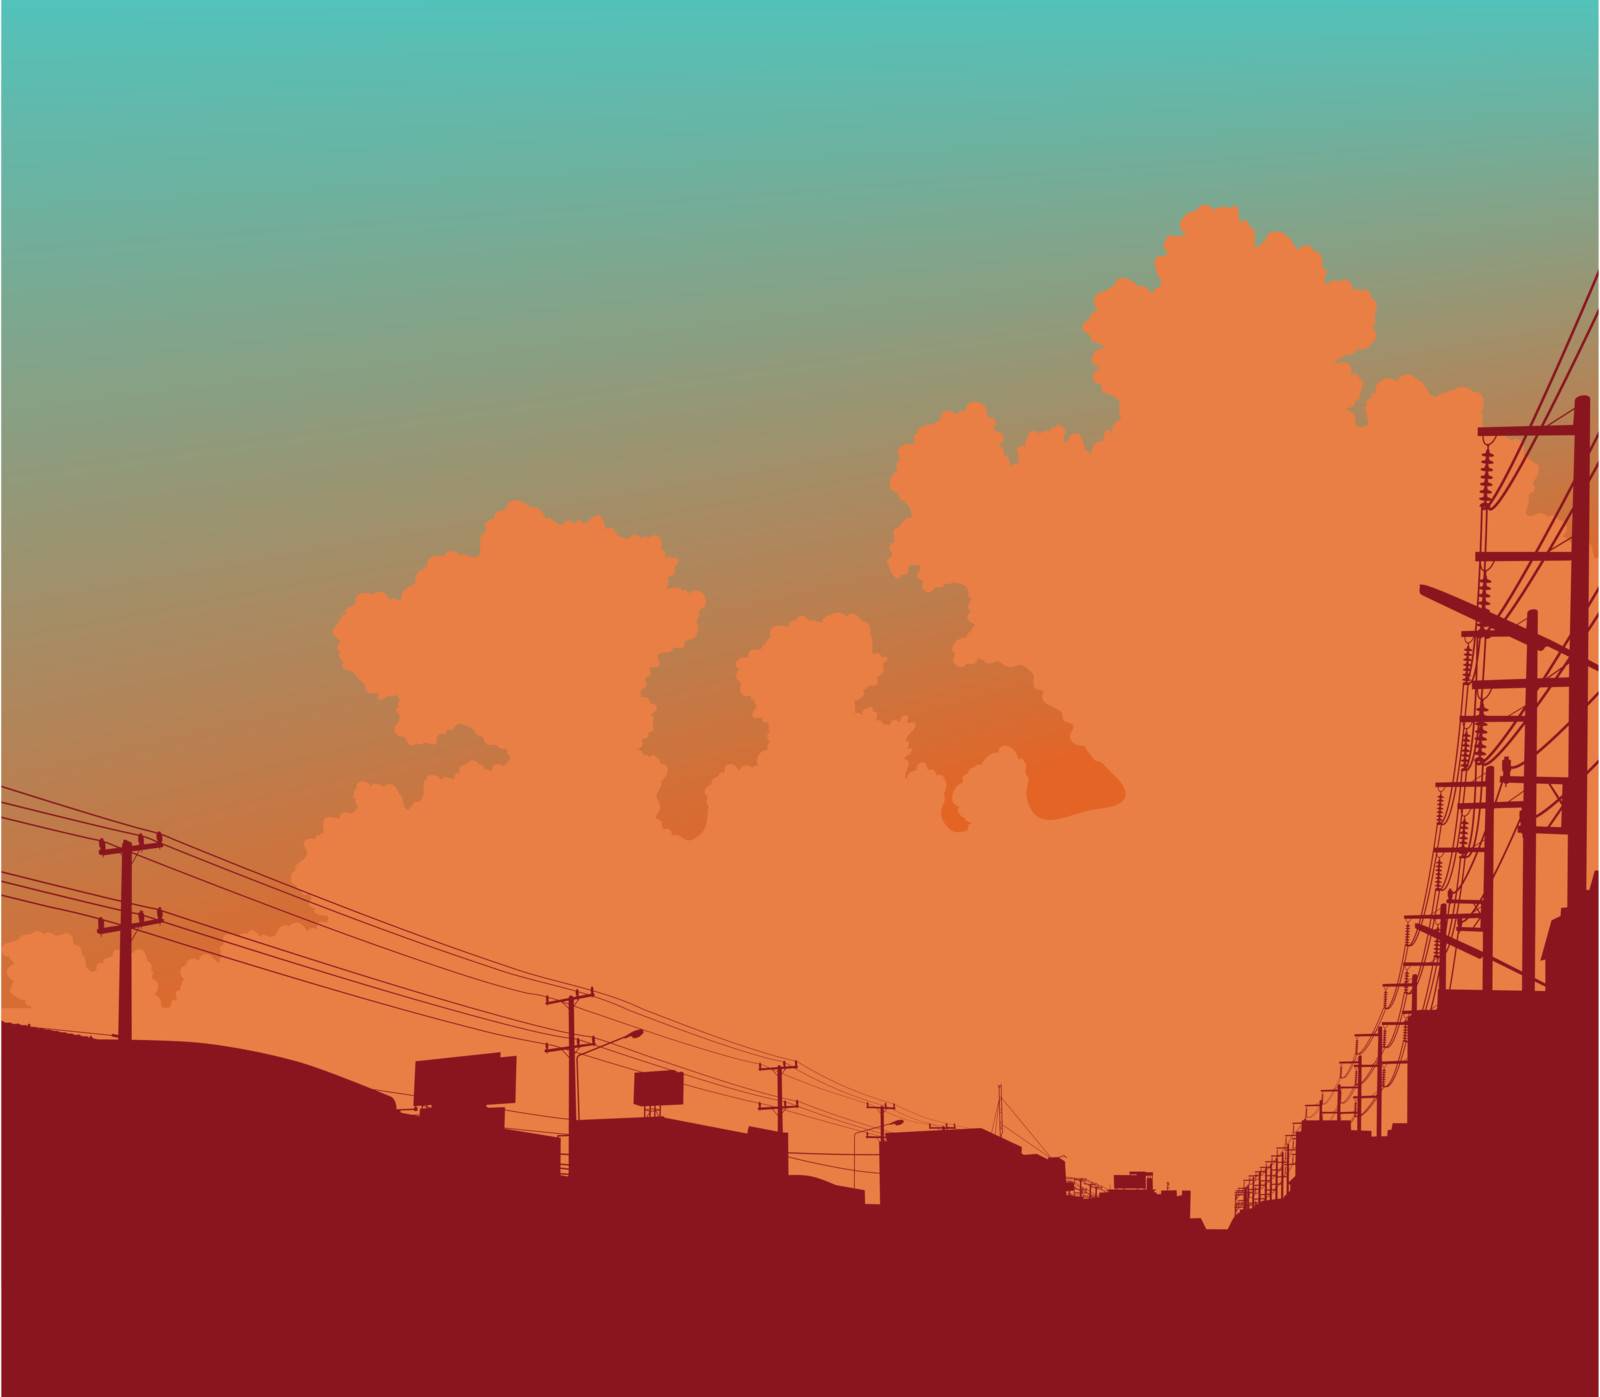 Editable vector illustration of clouds over a city